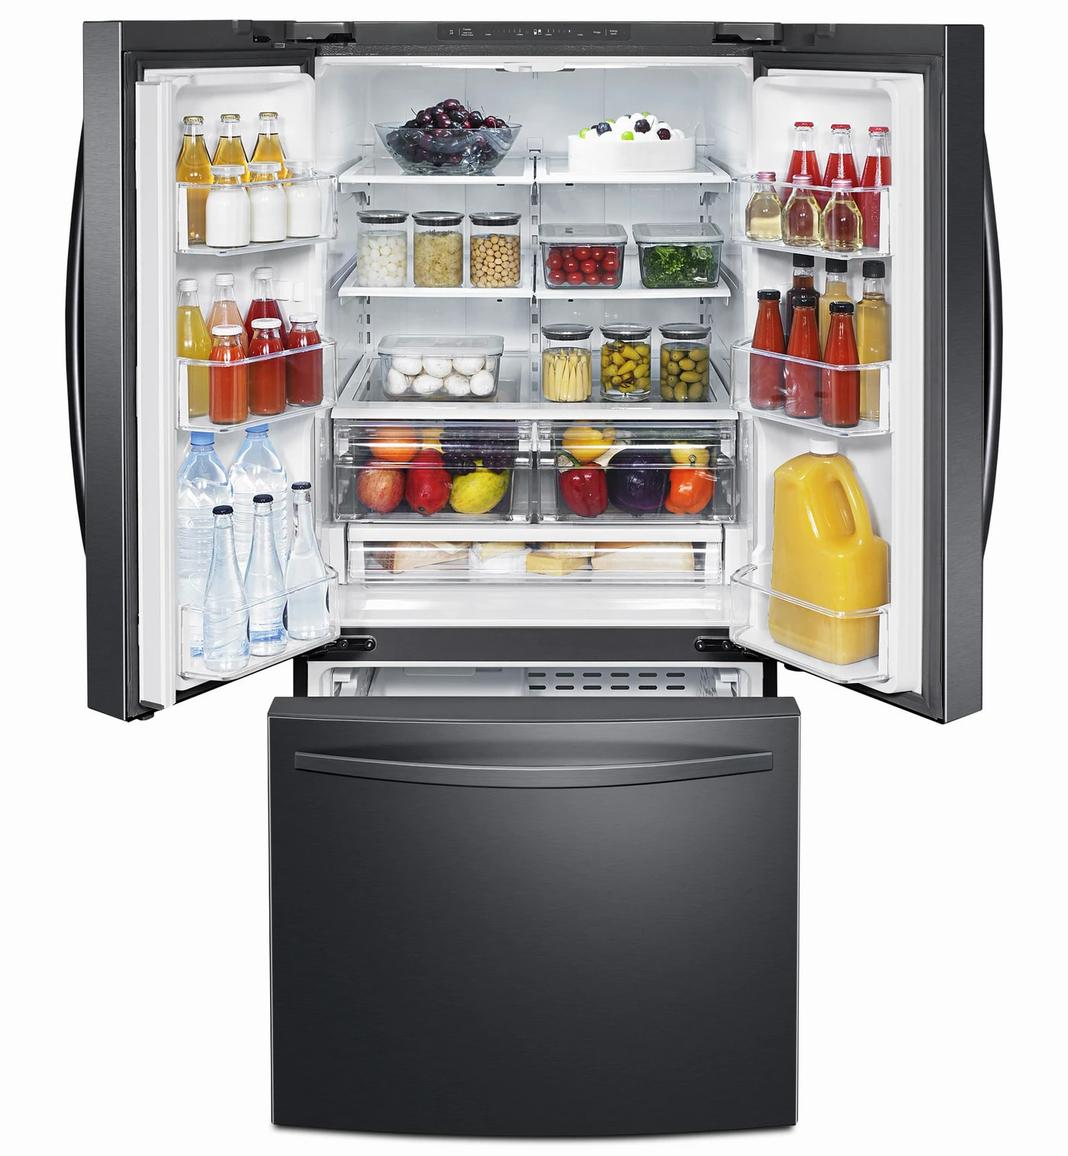 Samsung - 29.75 Inch 21.8 cu. ft French Door Refrigerator in Black Stainless - RF220NFTASG